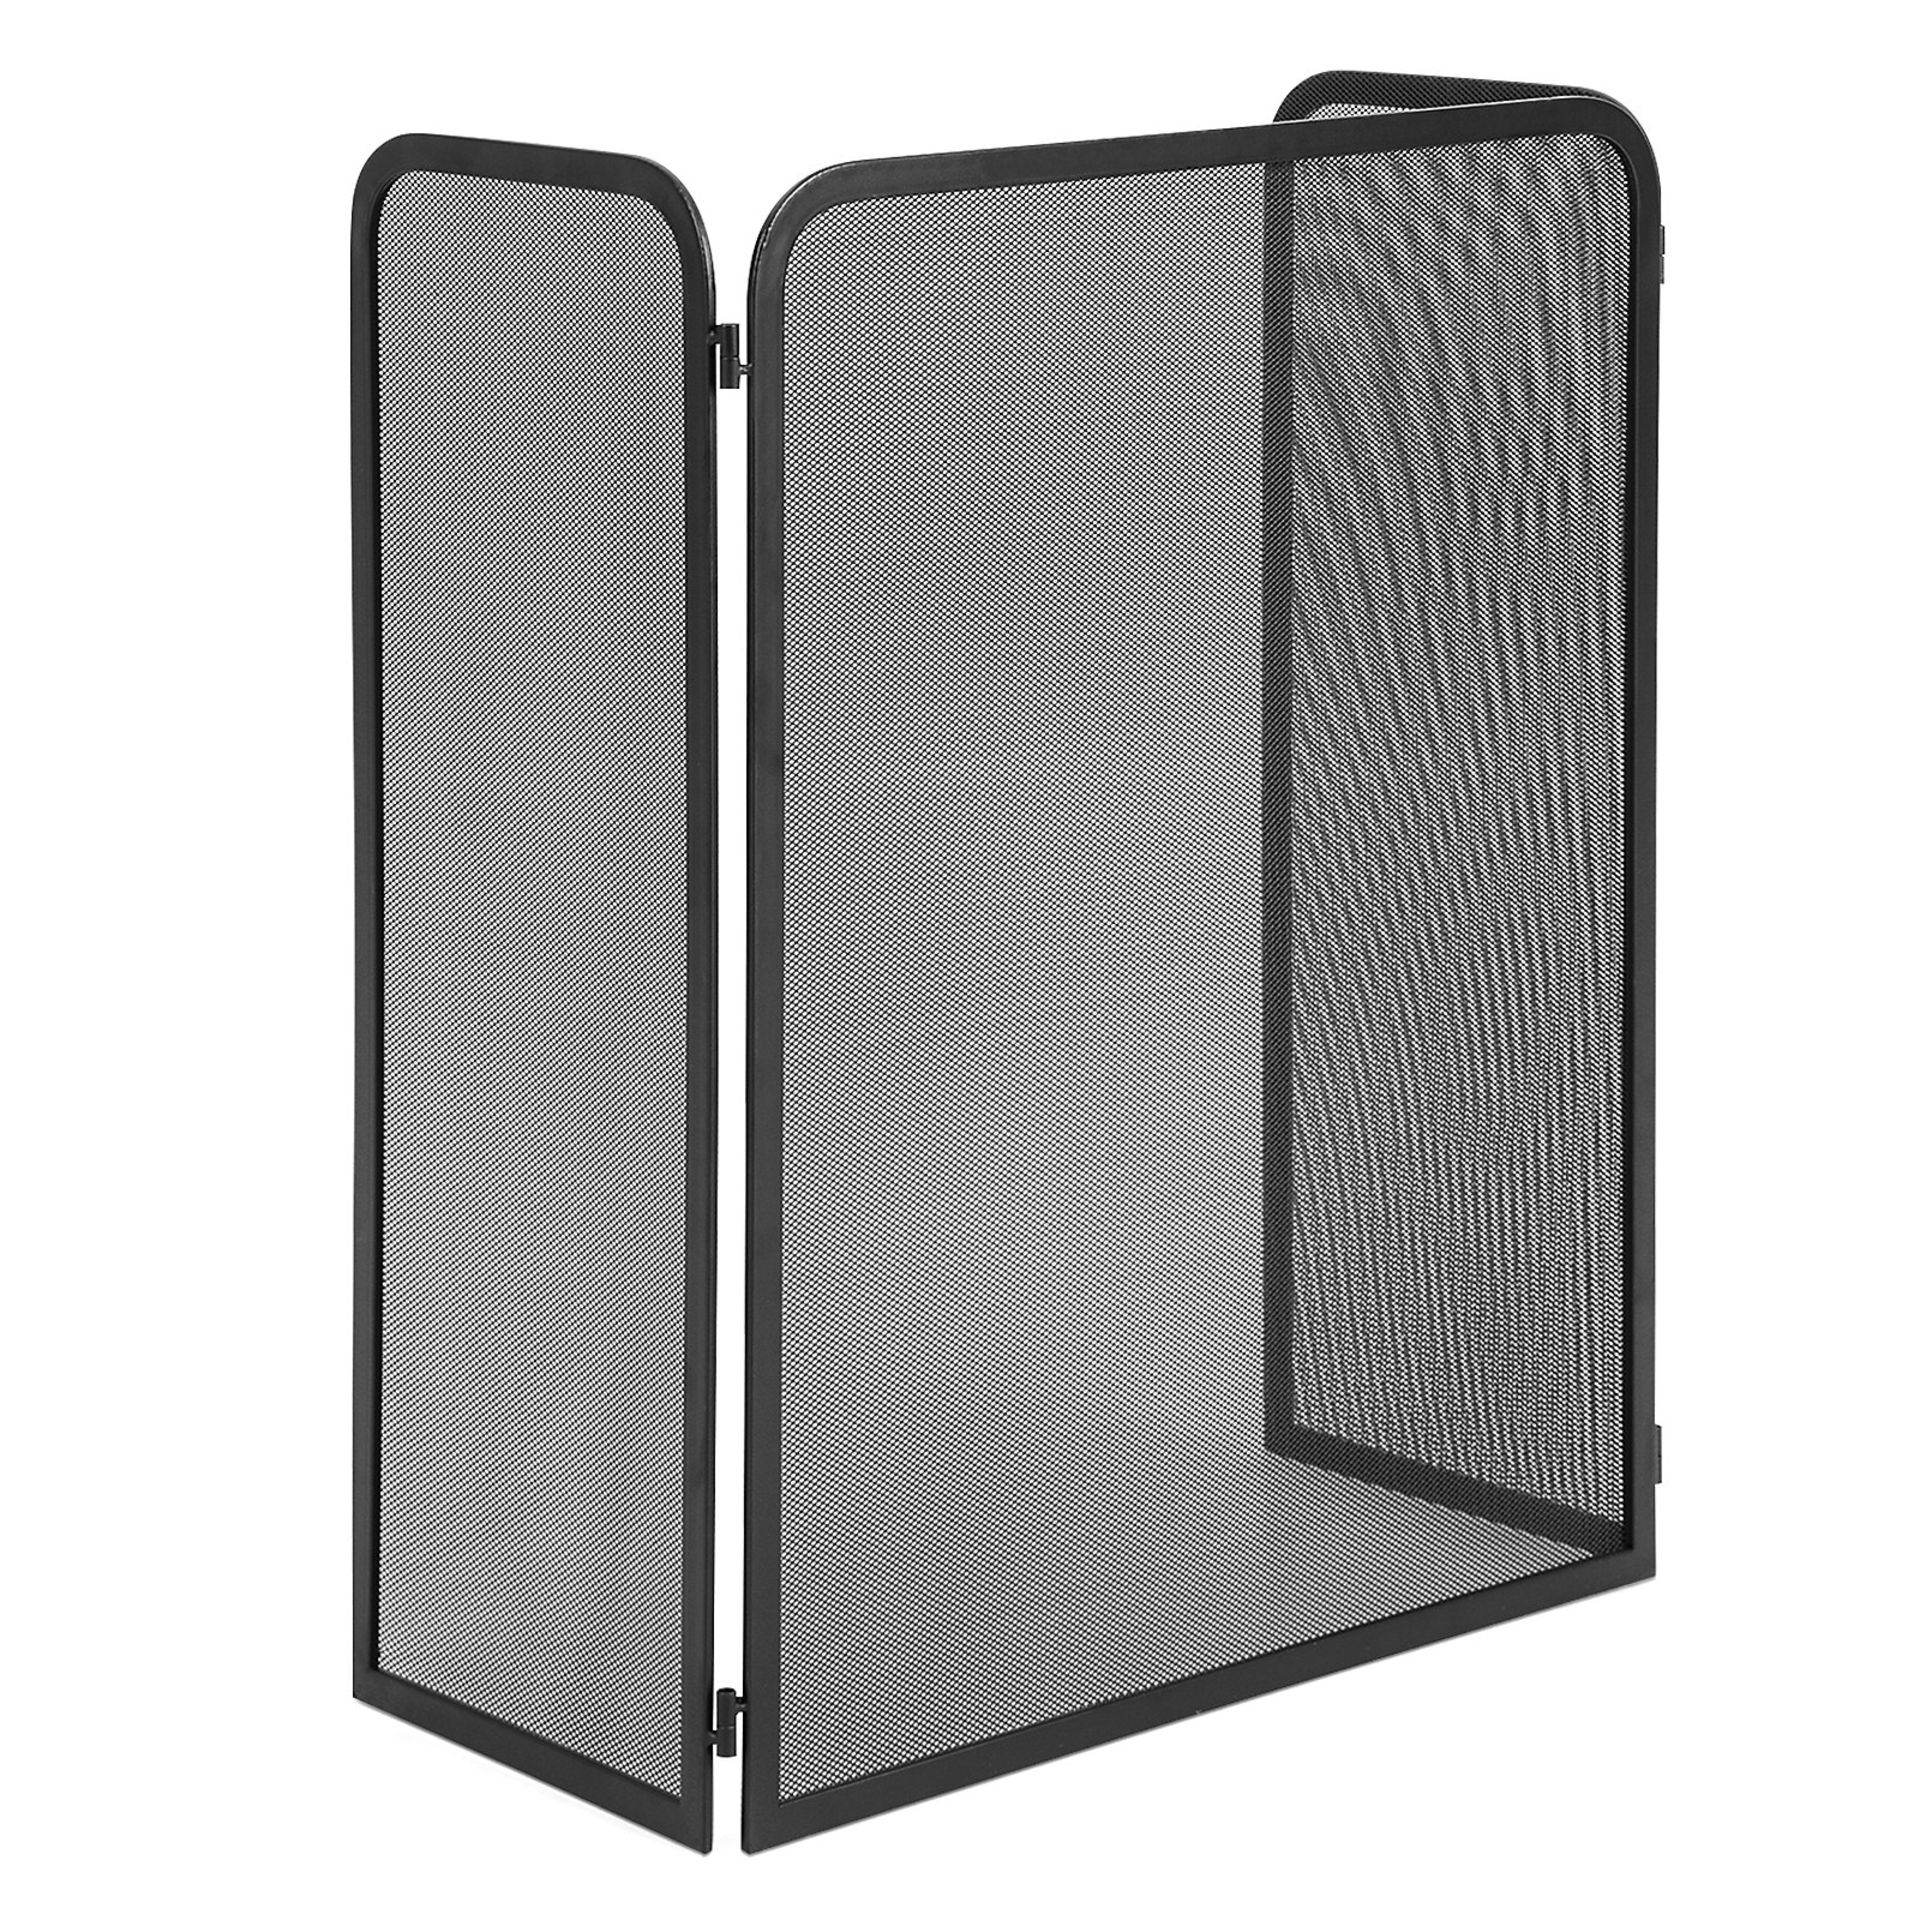 3-Panel Fireplace Screen with Flexible Hinges and Heavy-duty Metal Frame. - R13.5. Enhance the